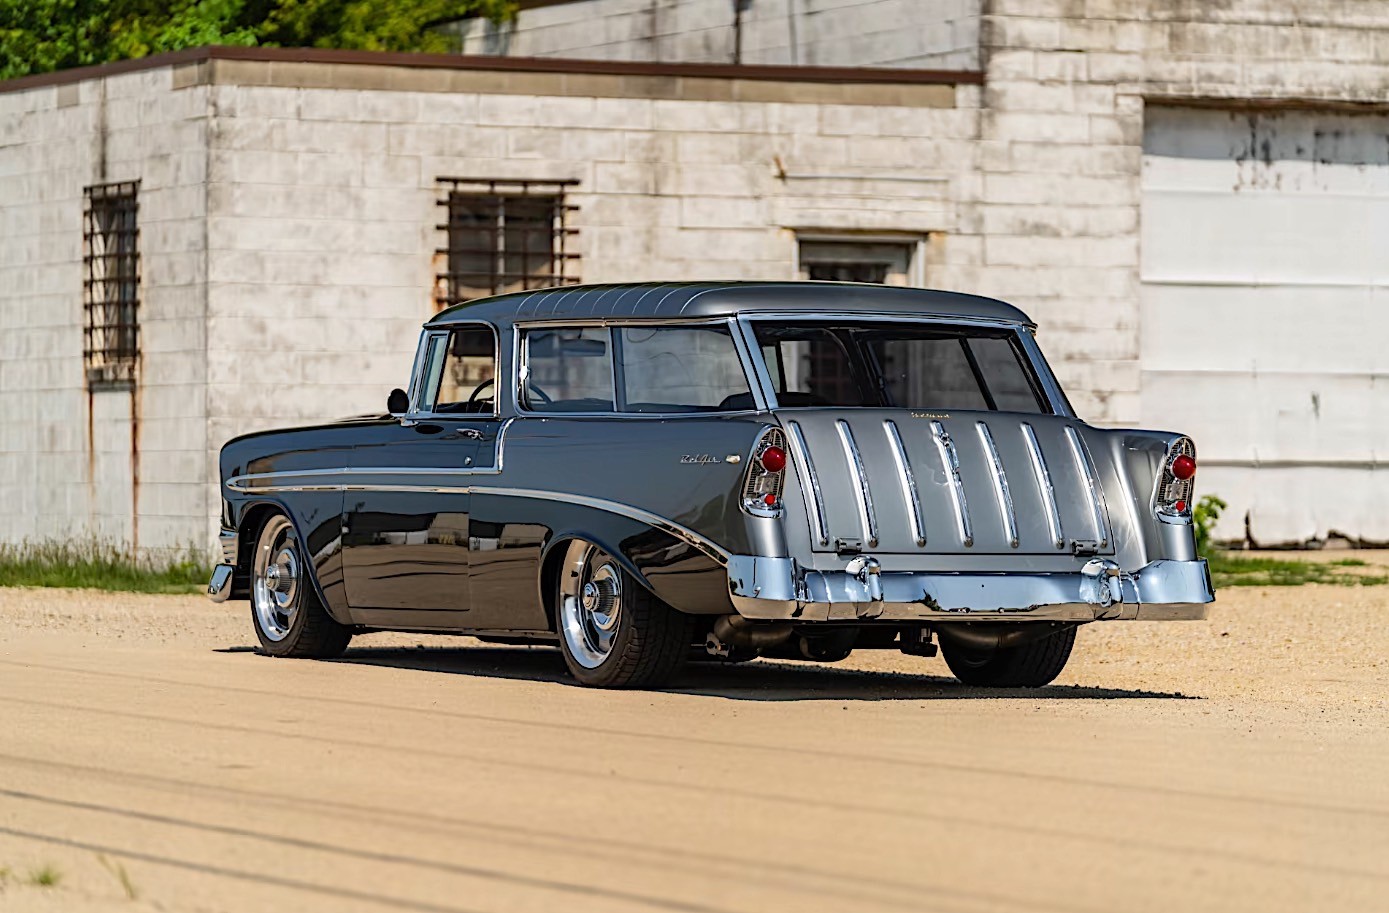 custom 1956 chevrolet nomad turns its back on $125,000 bid, tri-five refuses to sell